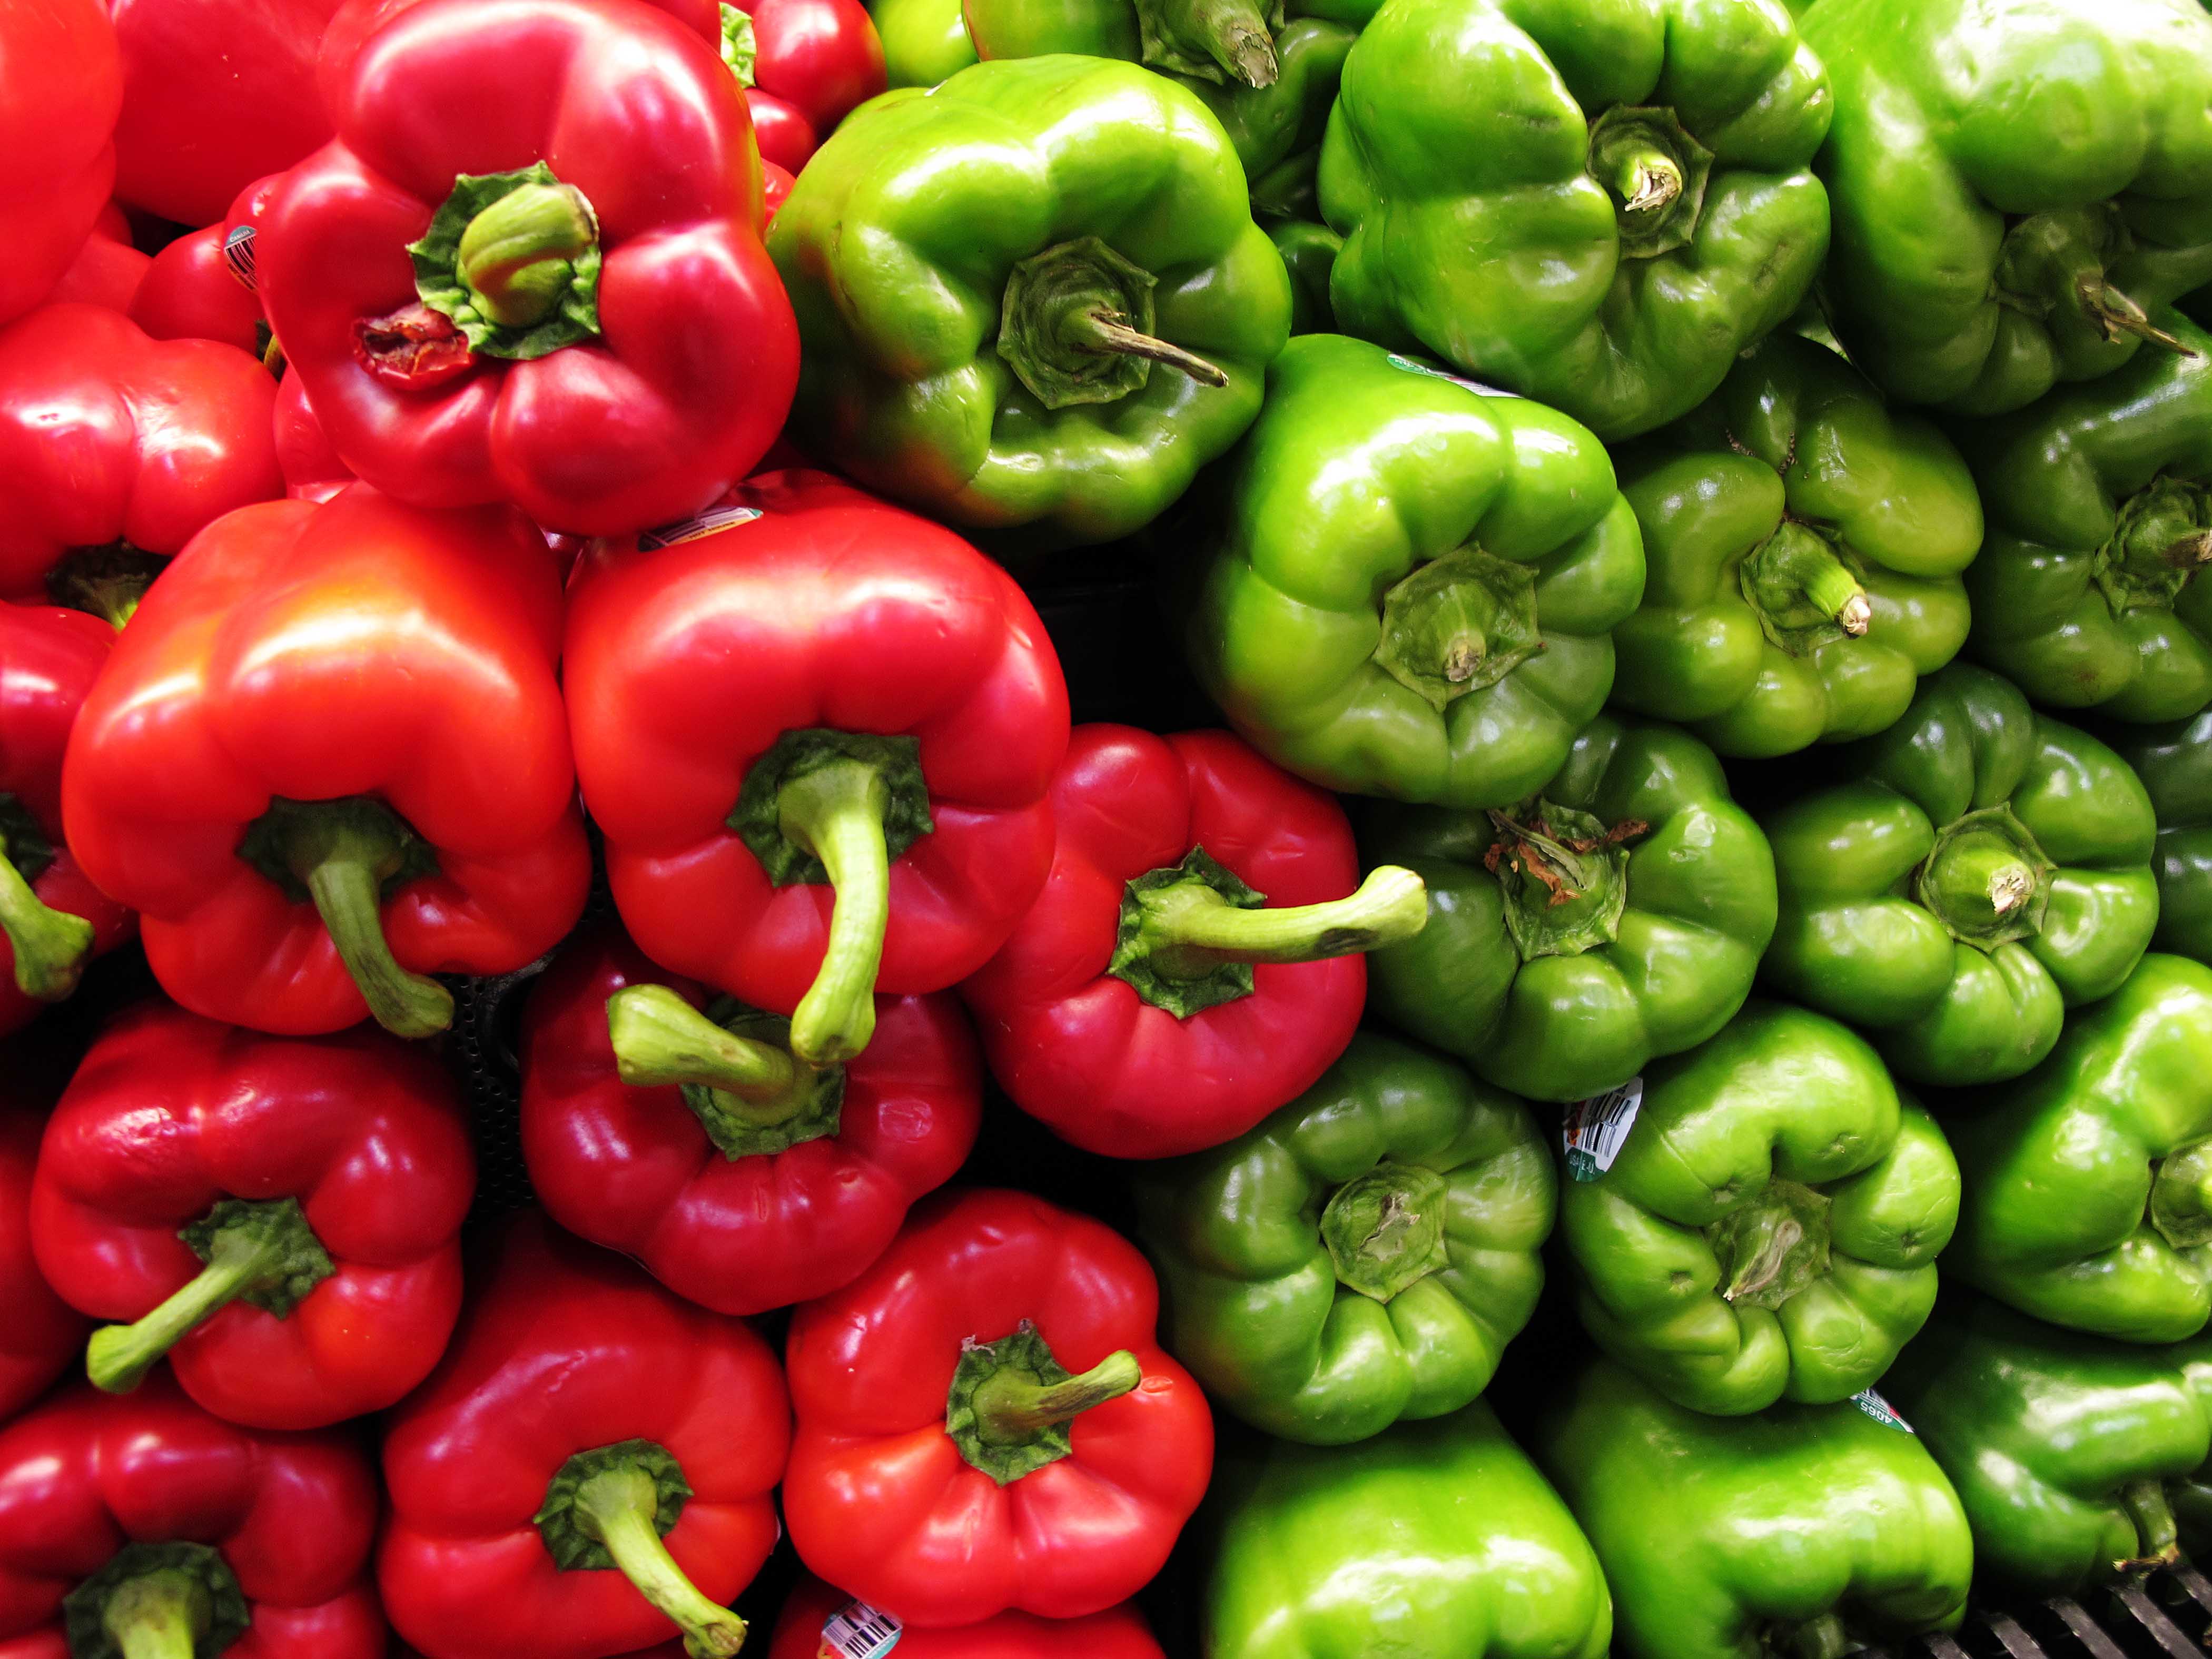 Mouthwatering Red and Green Peppers